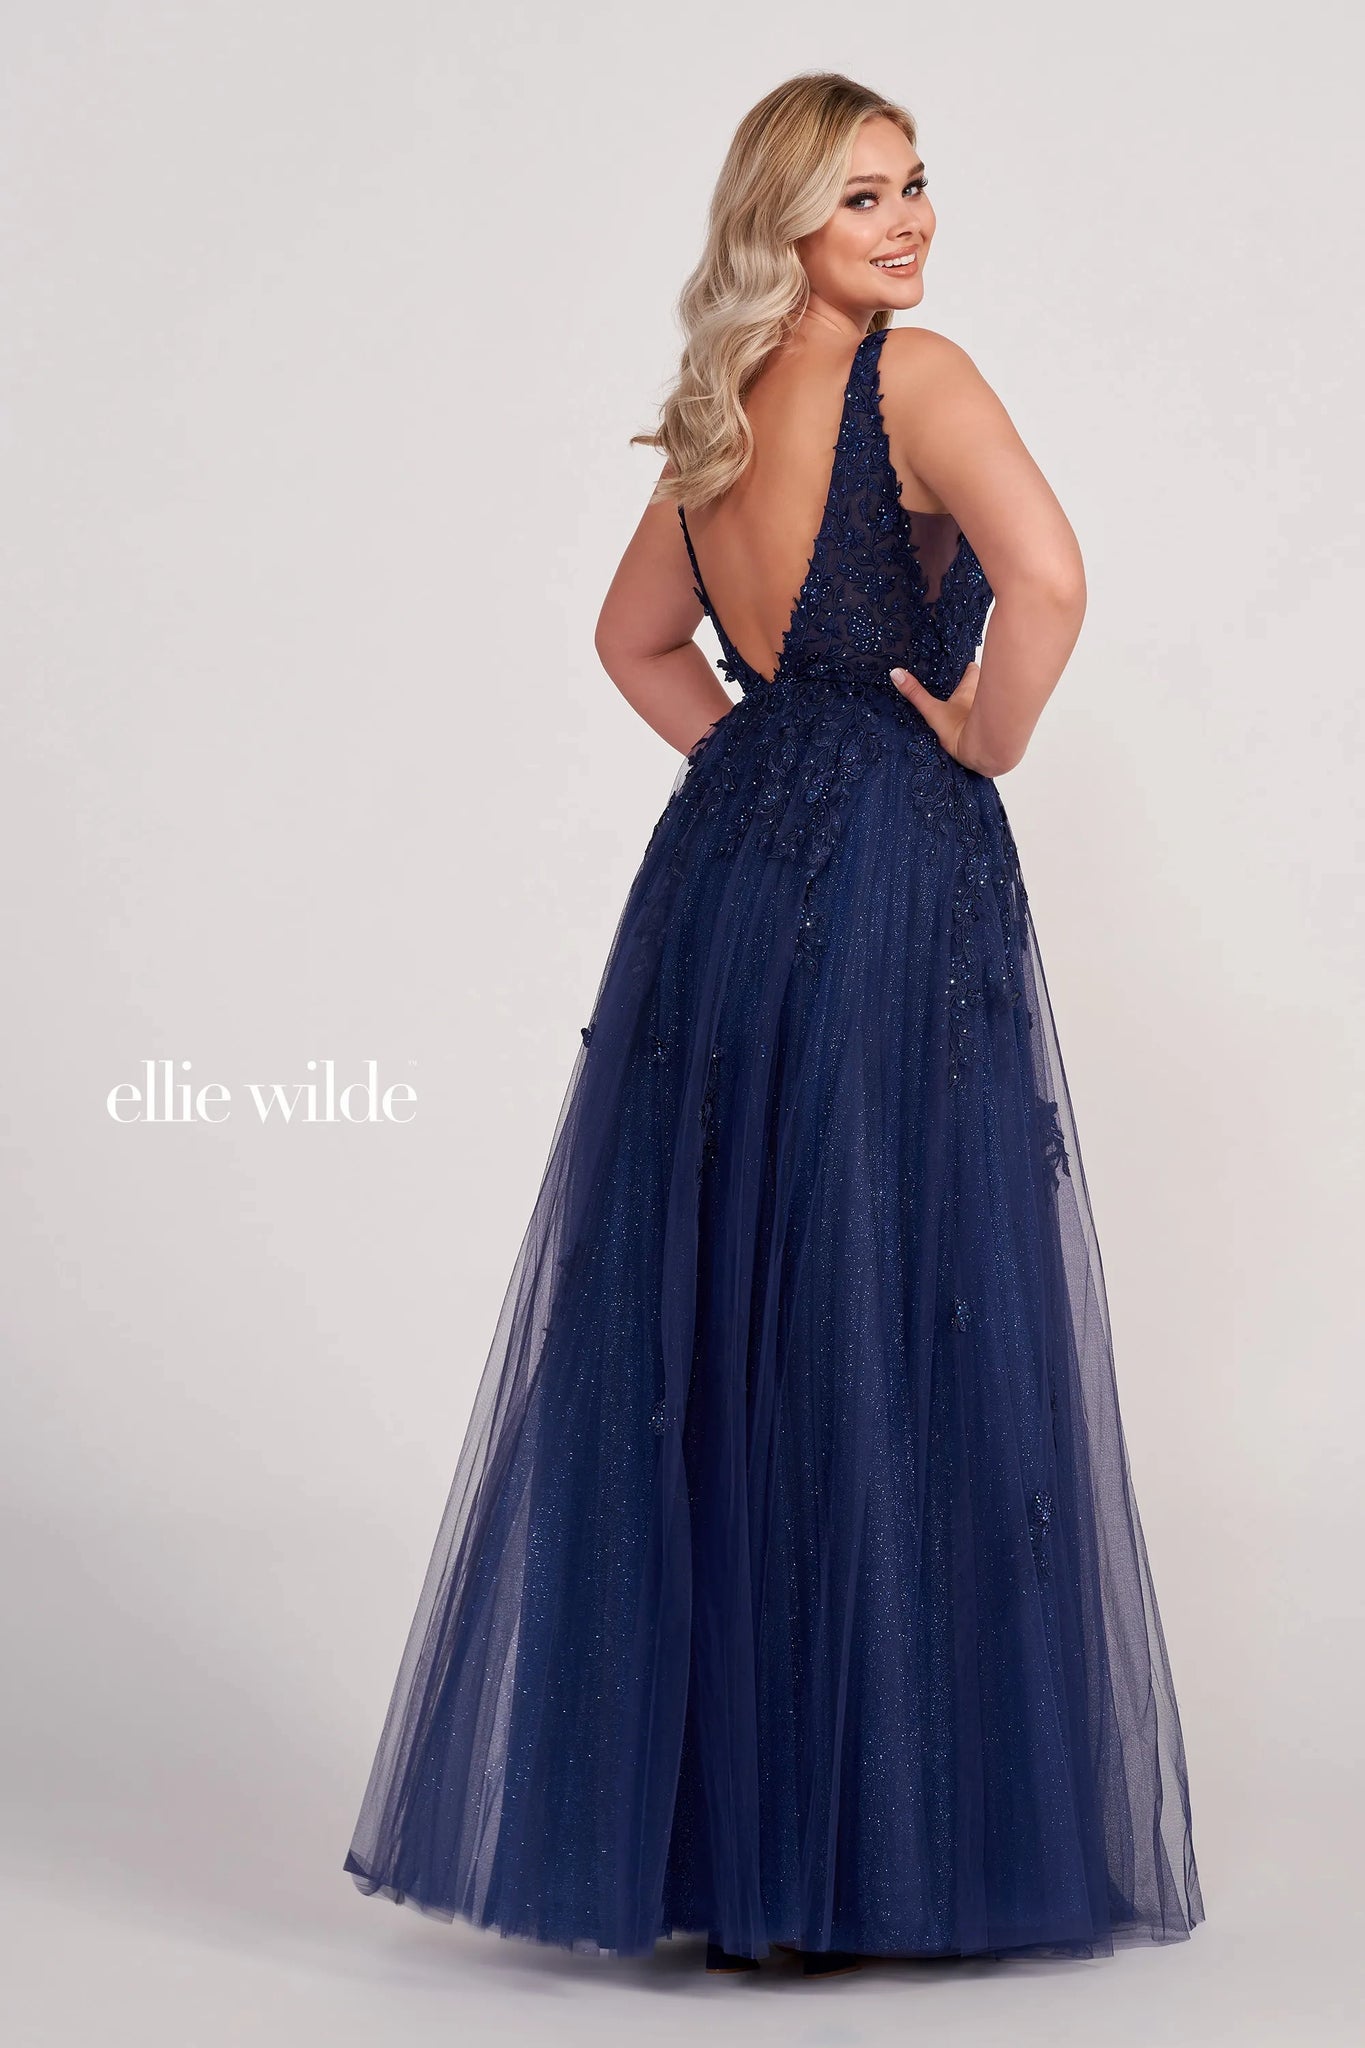  long party dress features a sleeveless A-line silhouette in glitter tulle, with a deep plunging neckline and an open V-back. Beaded lace appliques and 3D flowers richly embellished this pretty prom gown, finished with sheer side insets and a thigh-high slit.